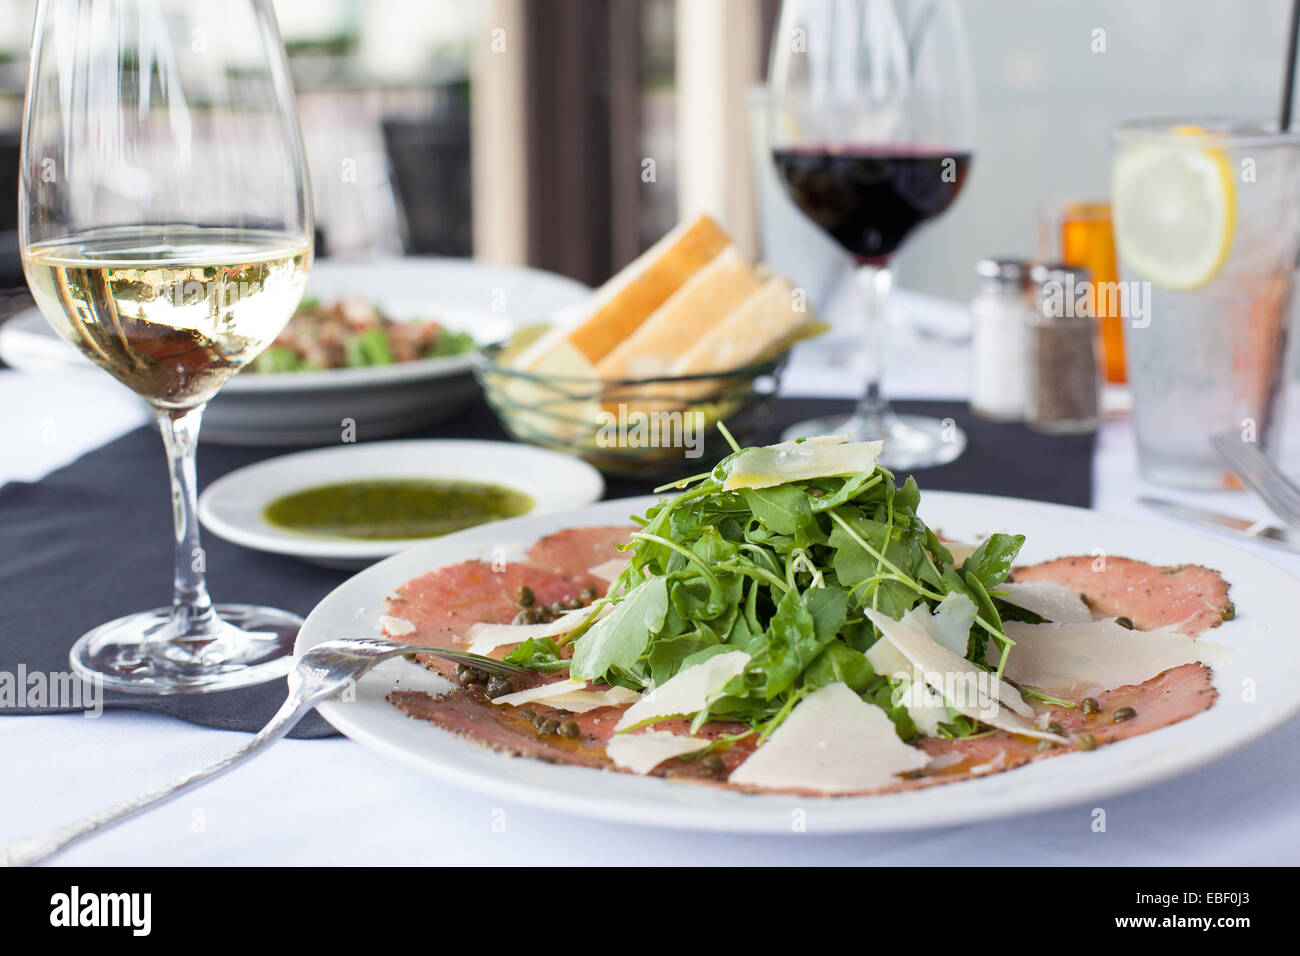 Italian meal outside on a patio with wine Stock Photo